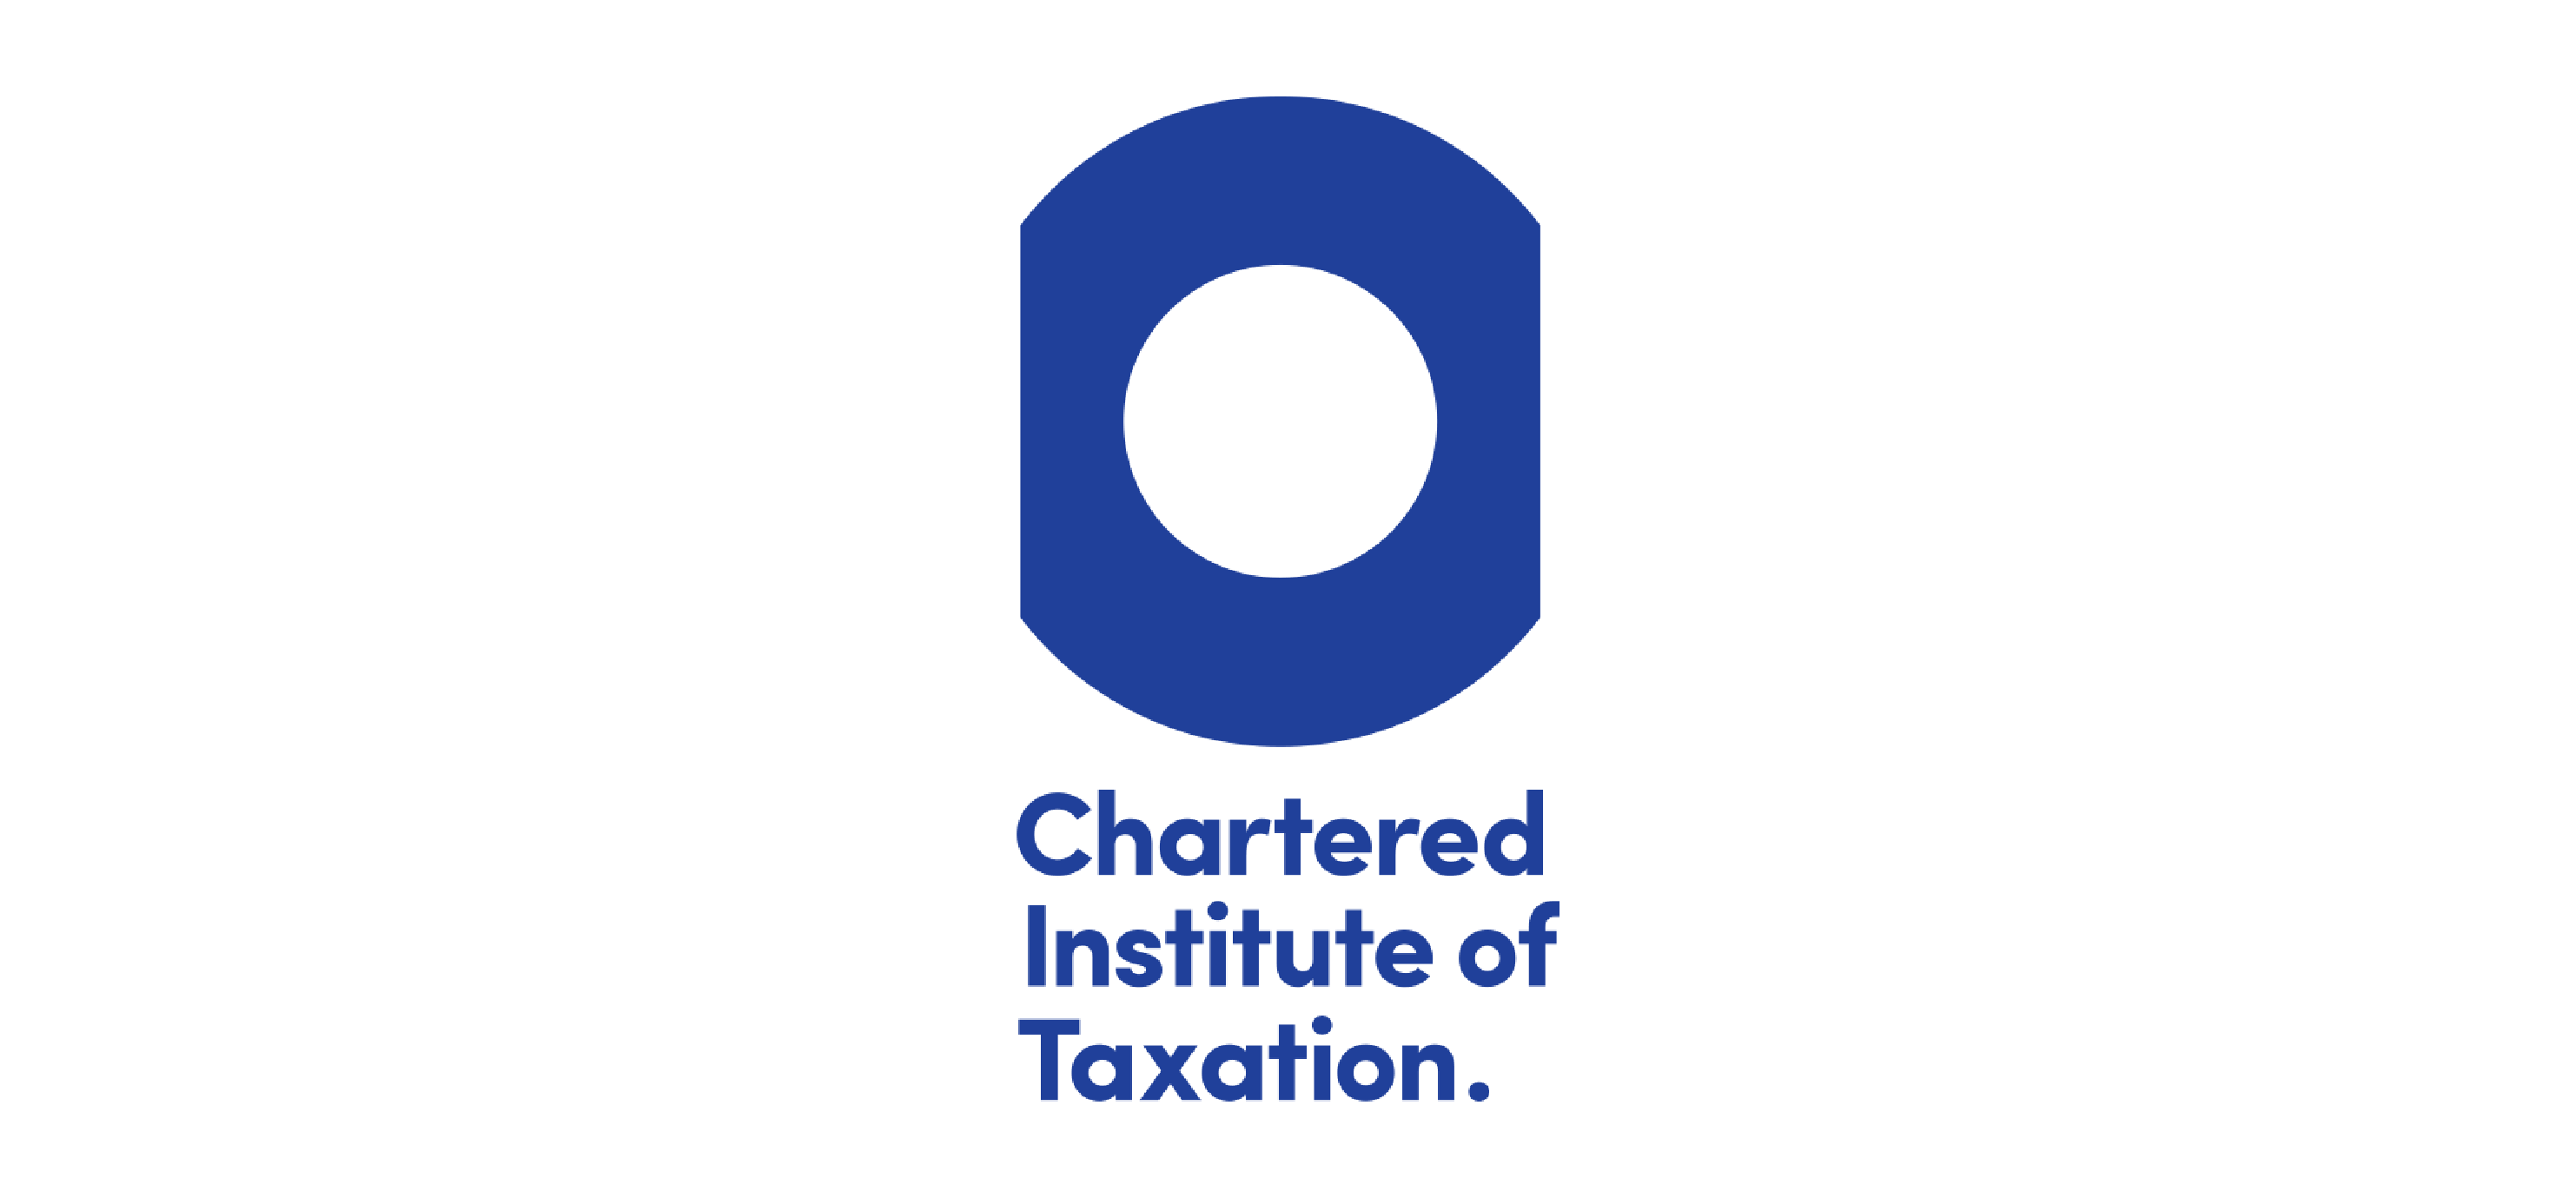 Chartered institute of taxation.